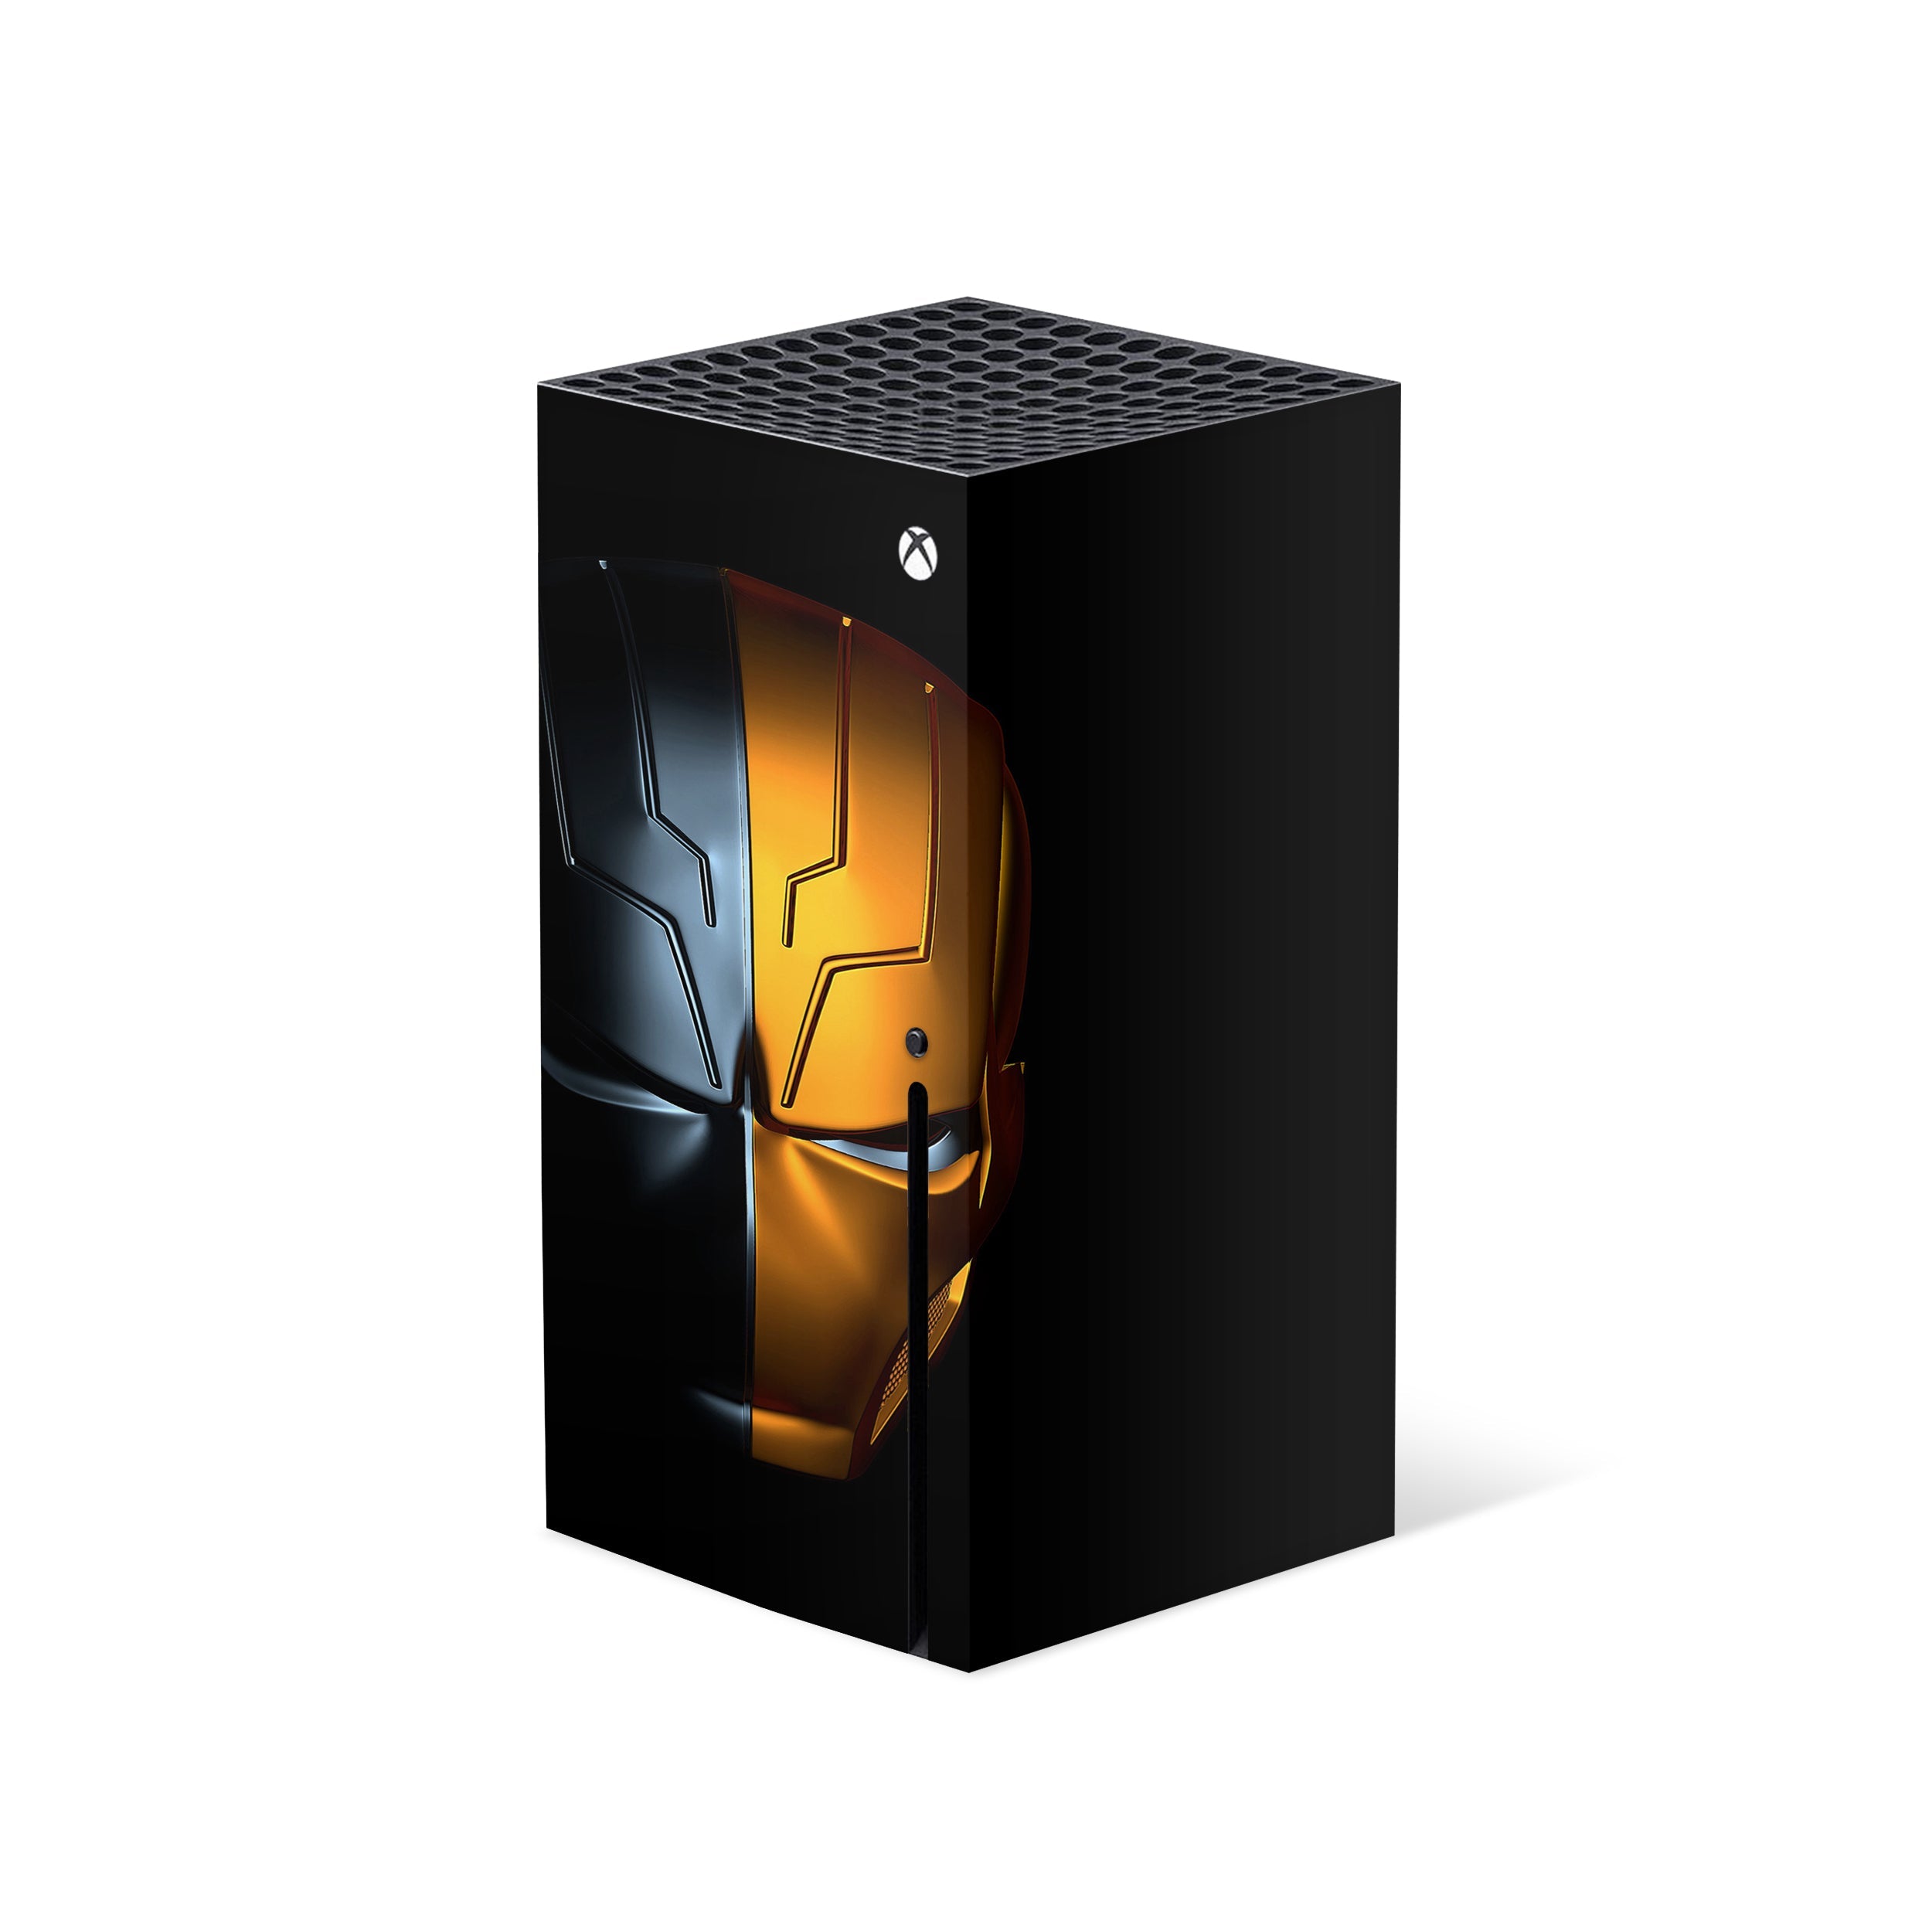 A video game skin featuring a DC Comics Deathstroke design for the Xbox Series X.